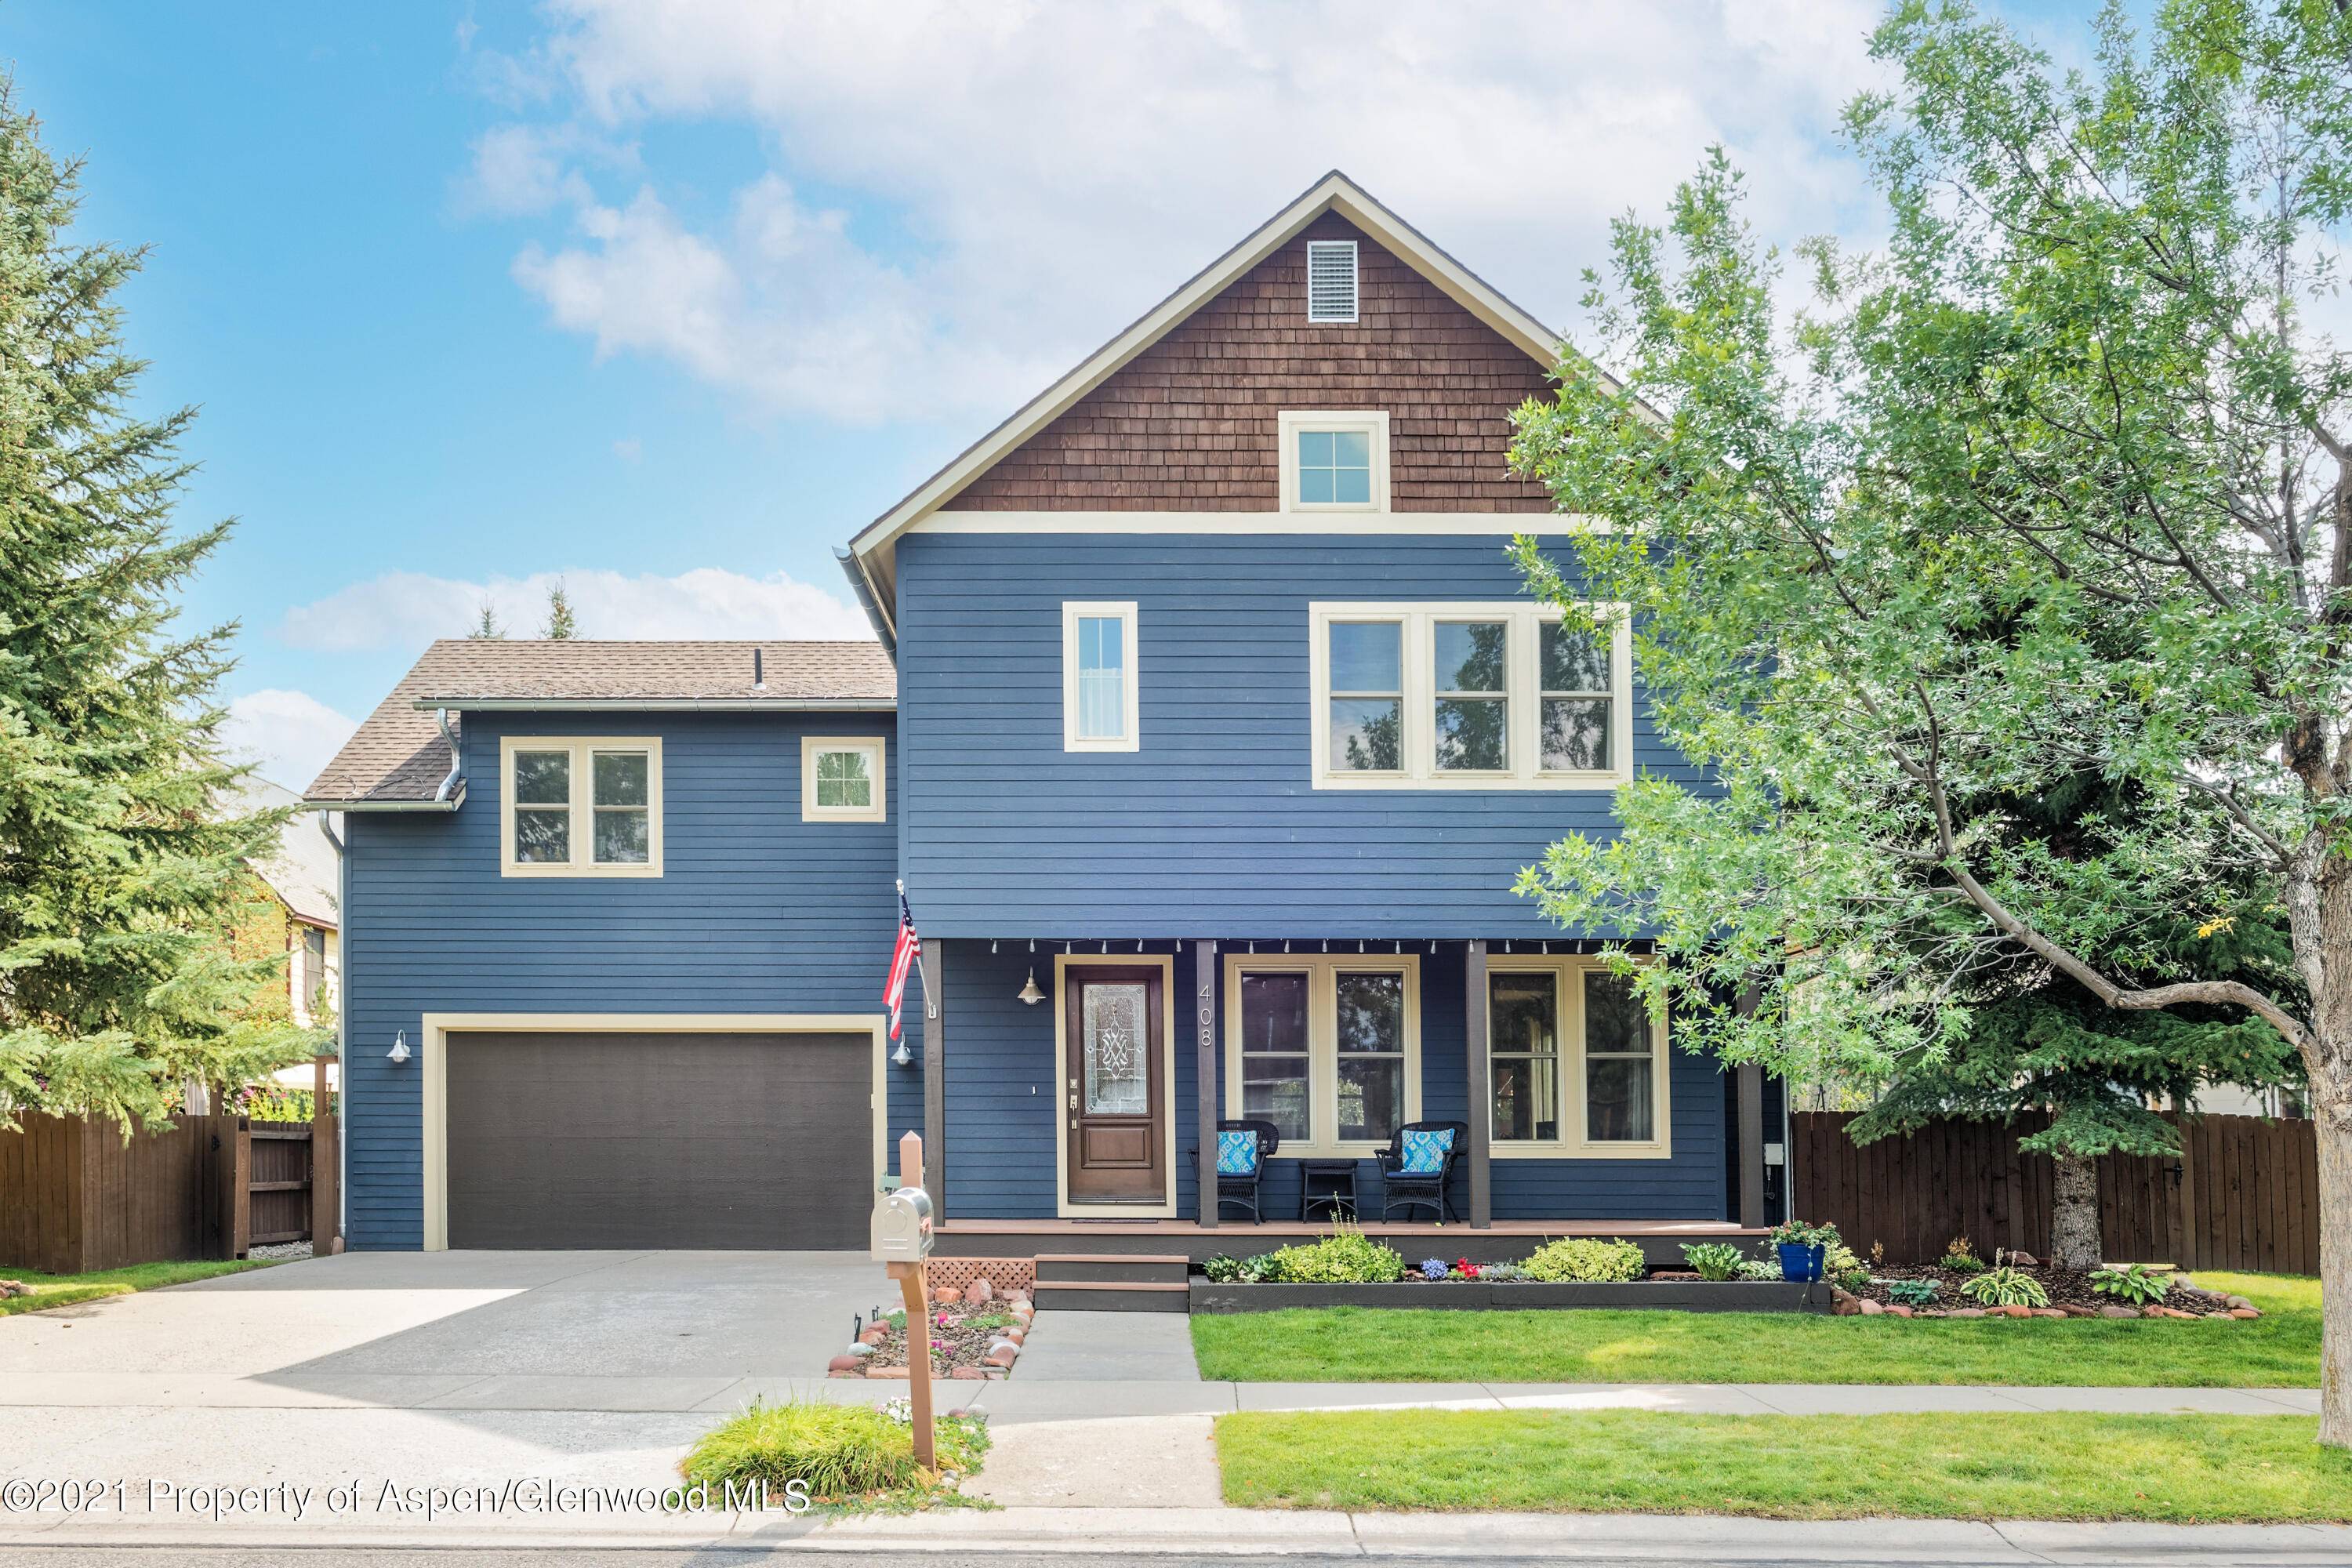 Charming home with an open lower level floor plan including kitchen, dining and living room that walks out to an expansive patio and a large private landscaped yard.